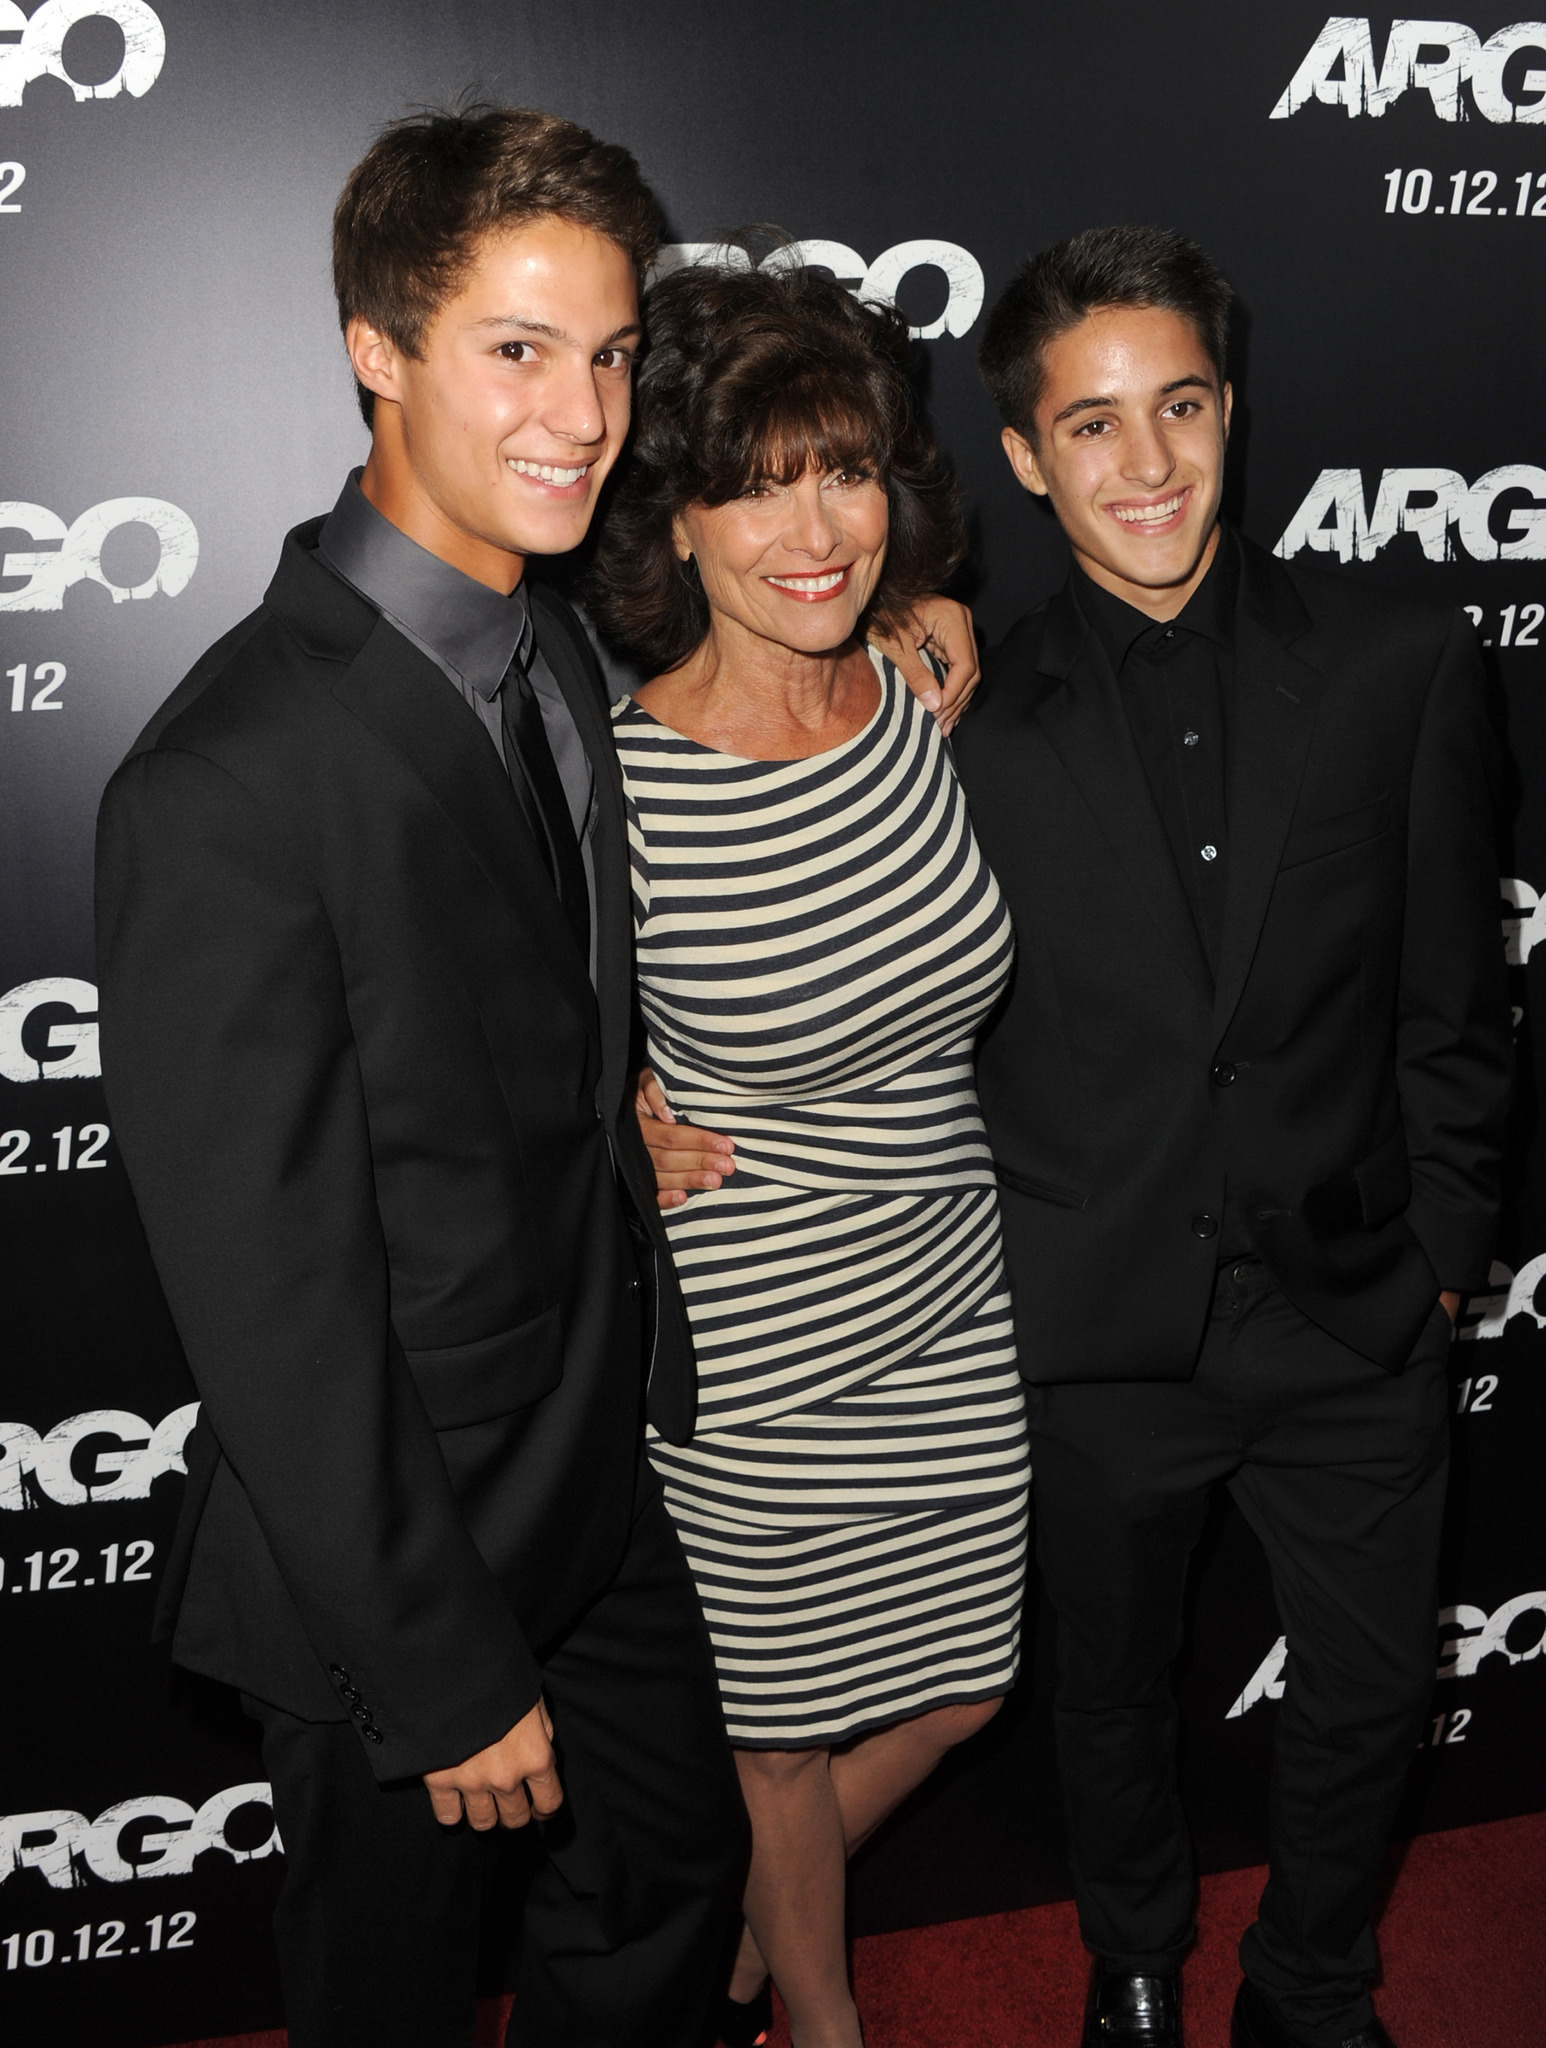 Adrienne Barbeau at event of Argo (2012)